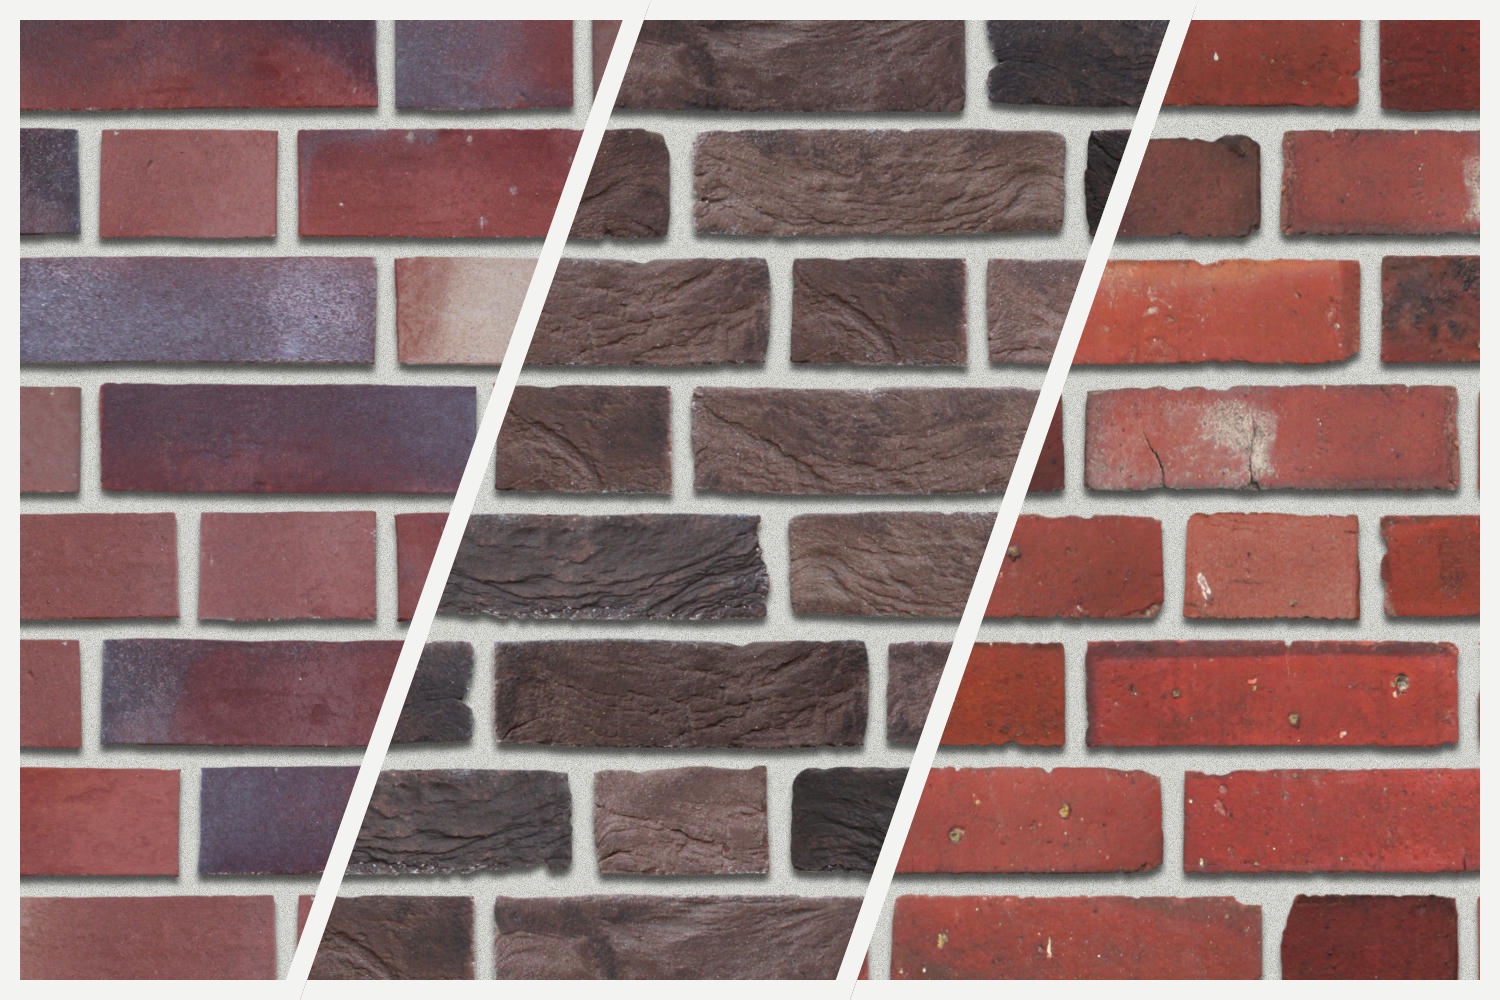 Examples of generated brick patterns